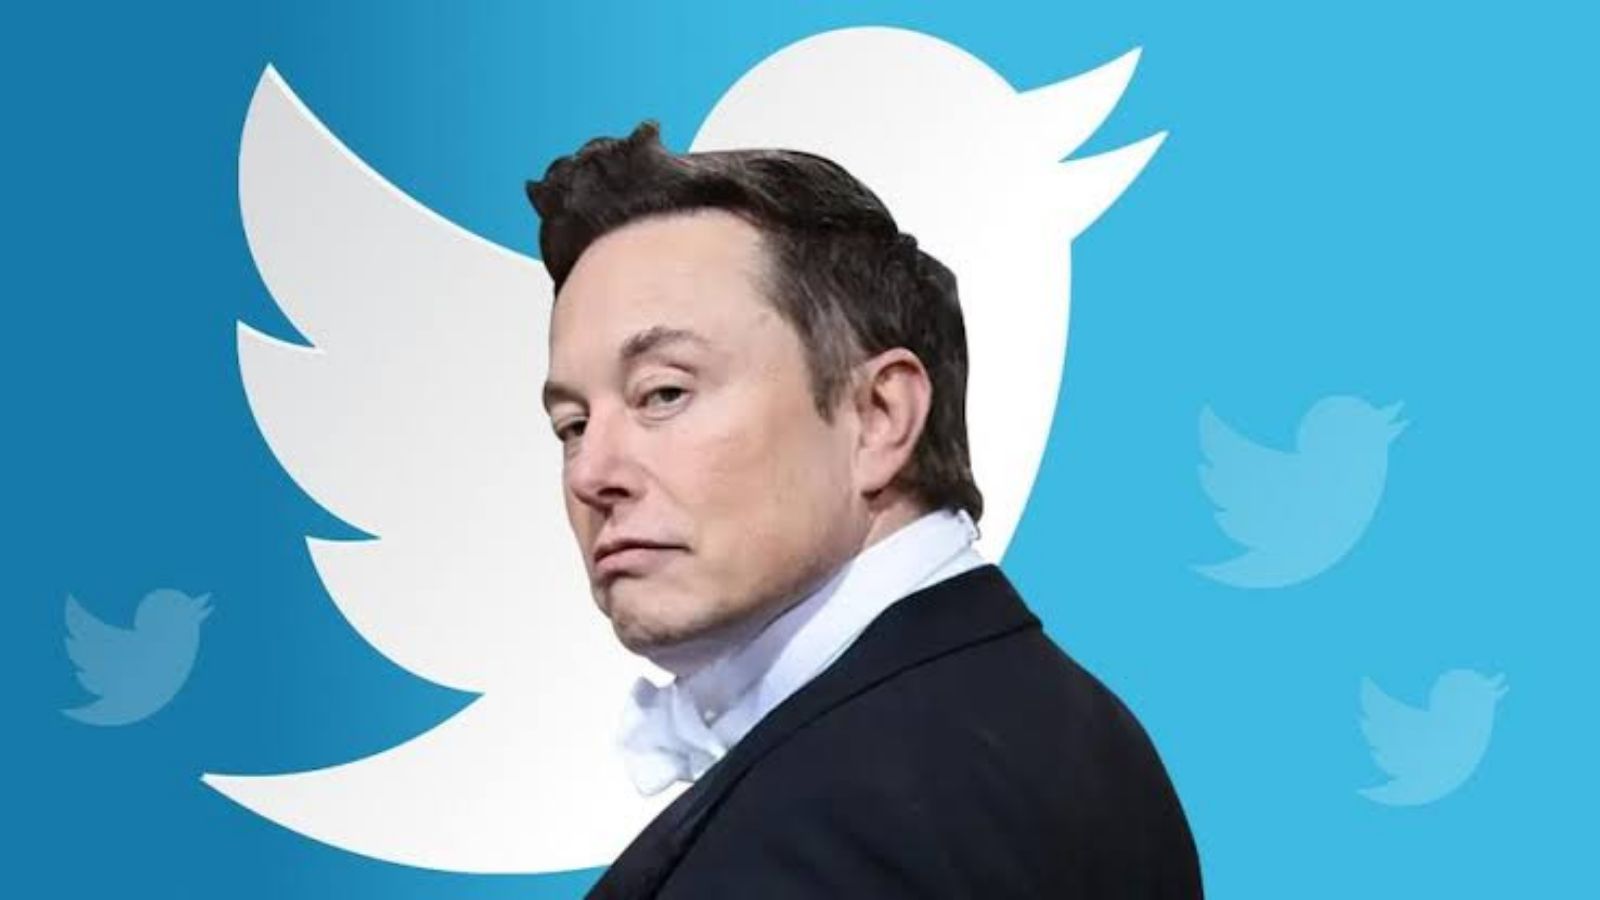 Elon Musk-led Twitter will be overturning bans on political advertisements imposed in 2019